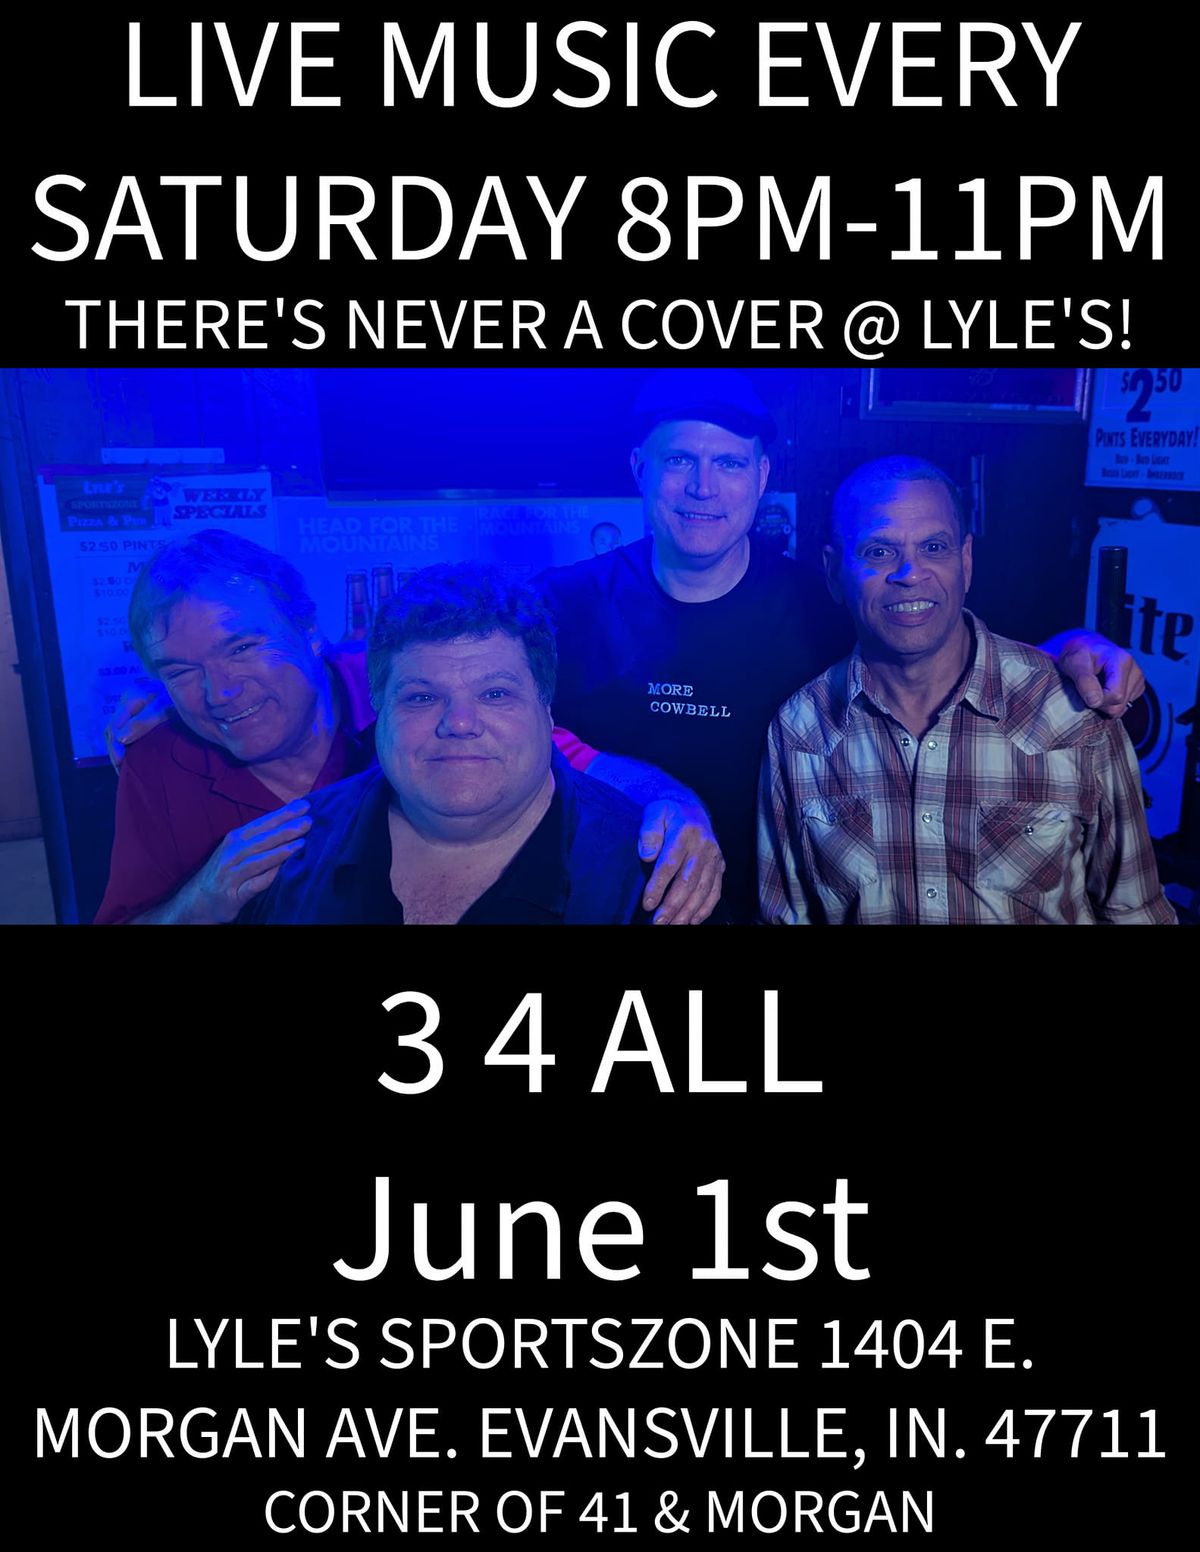 3 4 All live @ Lyle's 